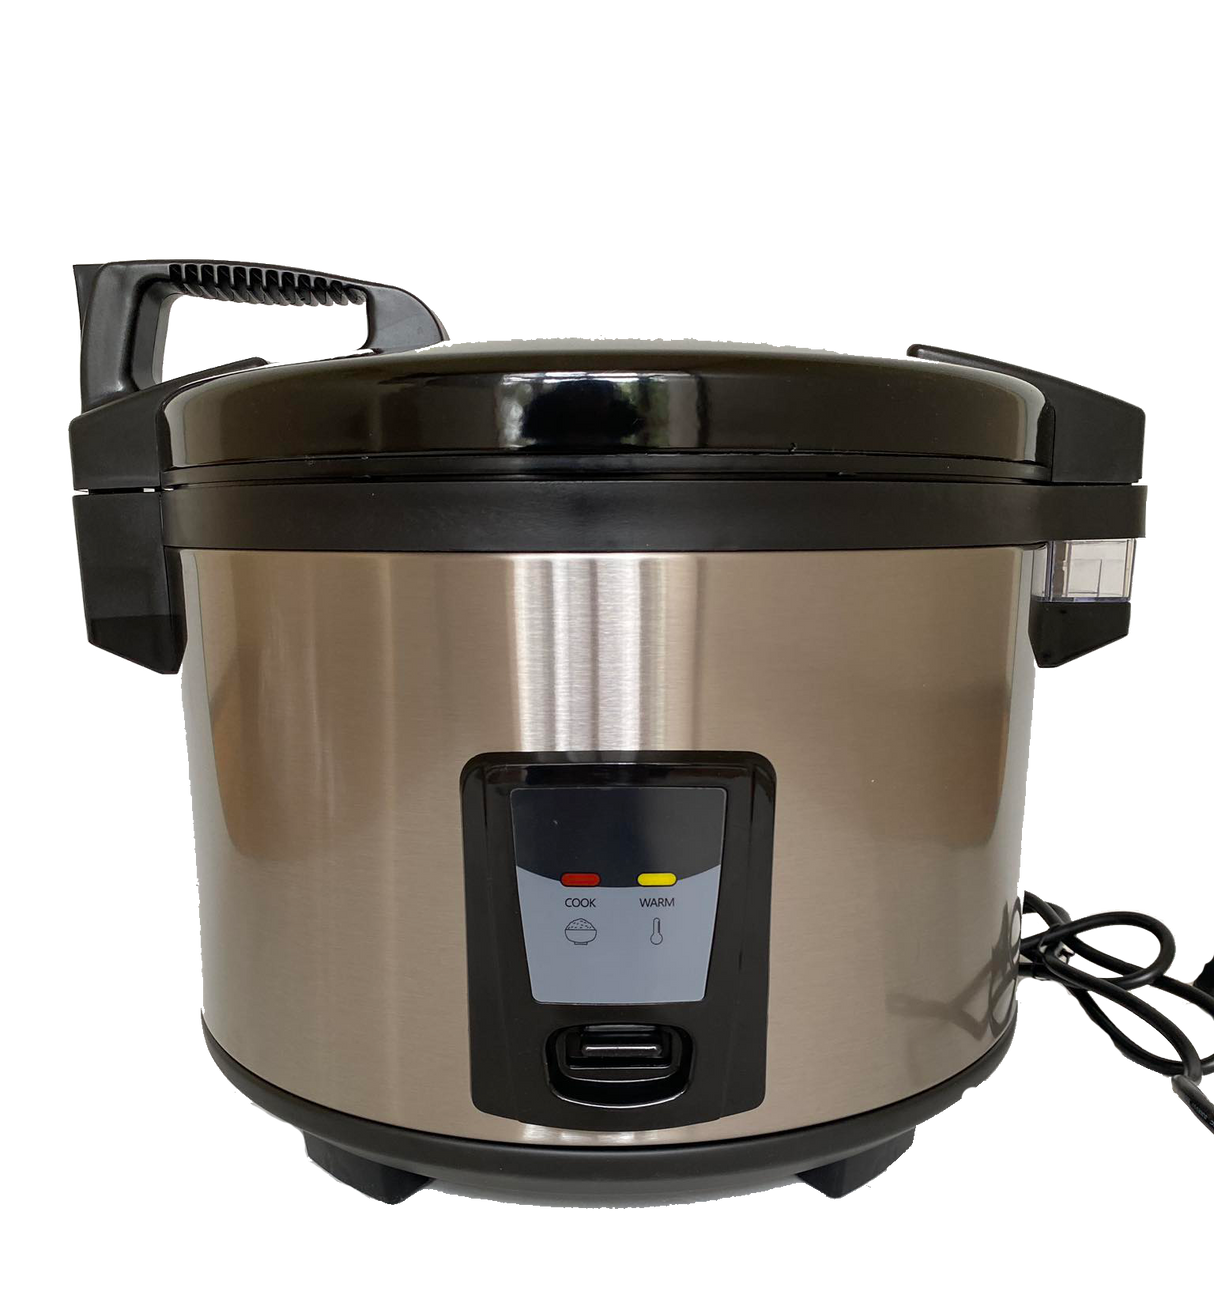 Commercial Rice Cooker 9L - Efficient and Reliable Kitchen Appliance - Includes Manual, Rice Spoon, and Measuring Jug